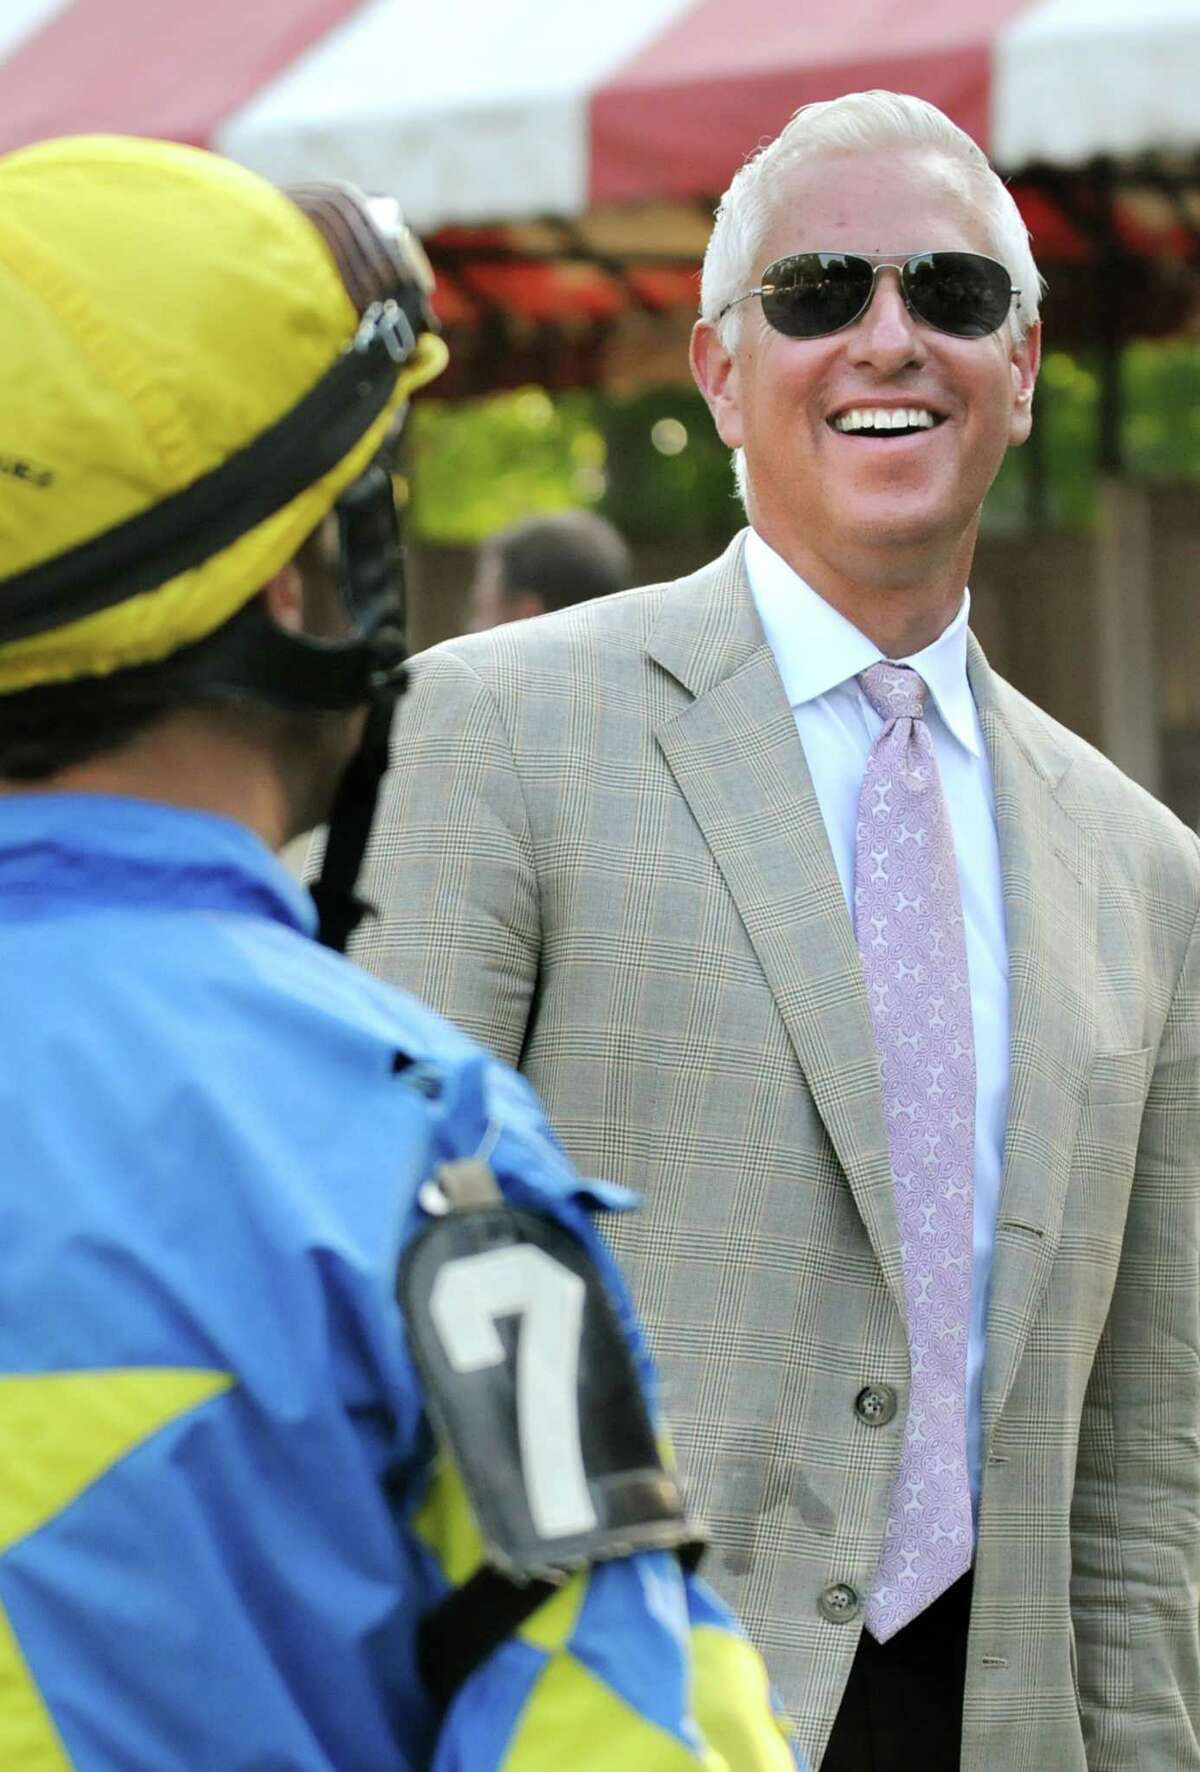 Trainer Todd Pletcher with jockey John Velazquez before The Hopeful on Monday, Sept. 7, 2015, at Saratoga Race Course in Saratoga Springs, N.Y. (Cindy Schultz / Times Union)